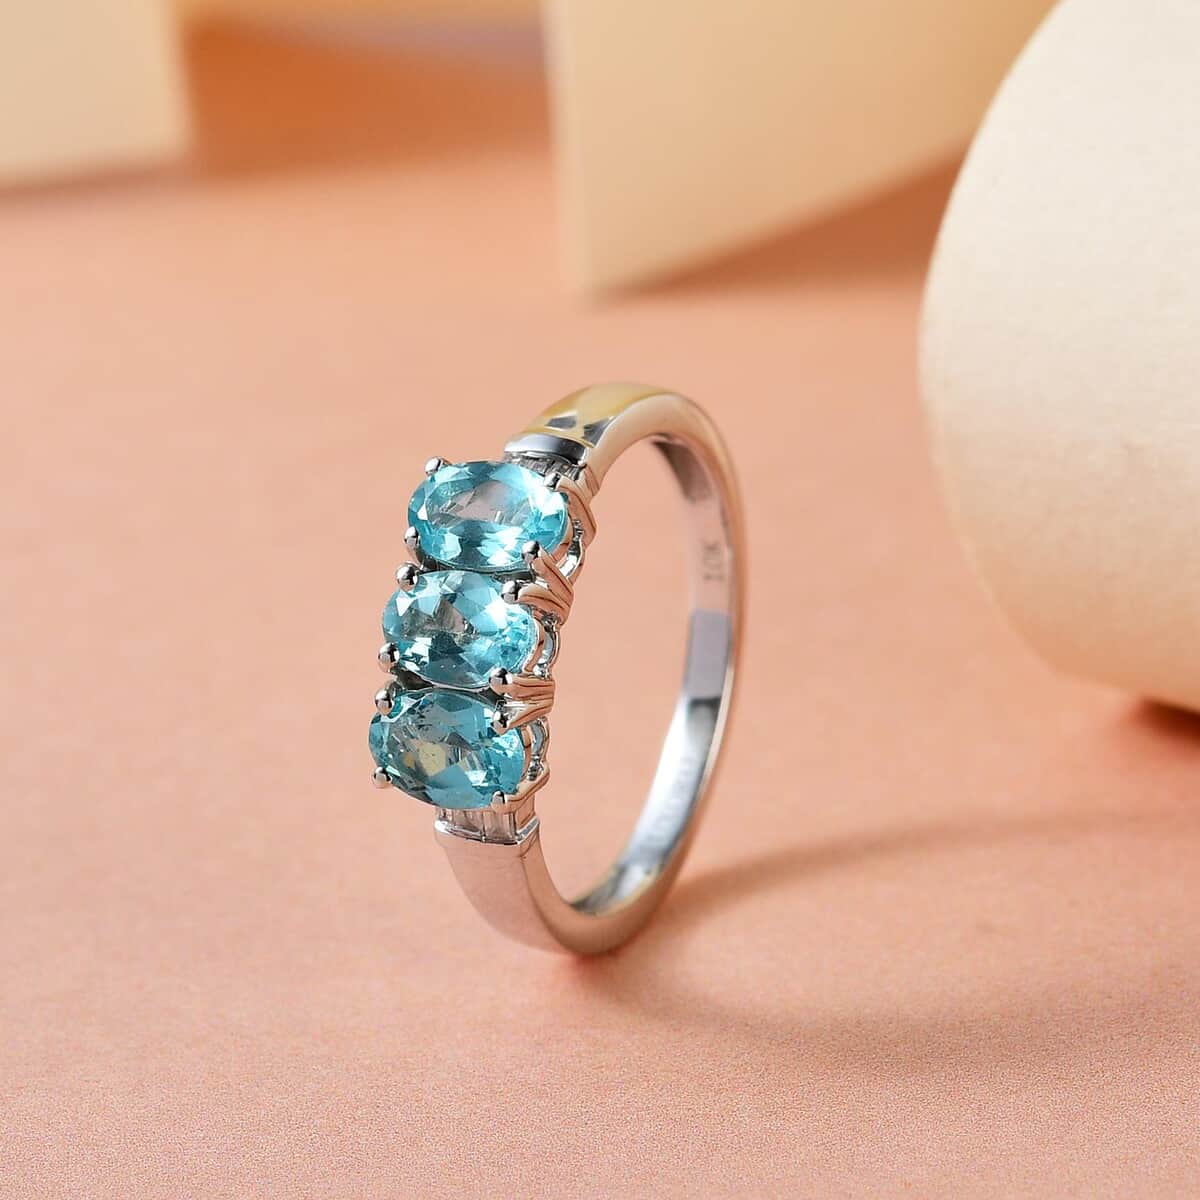 LUXORO 10K White Gold Premium Madagascar Paraiba Apatite, Diamond Trilogy Ring (Size 10.0) (2.50 g) (Delivery in 12-15 Business Days) 1.50 ctw image number 1